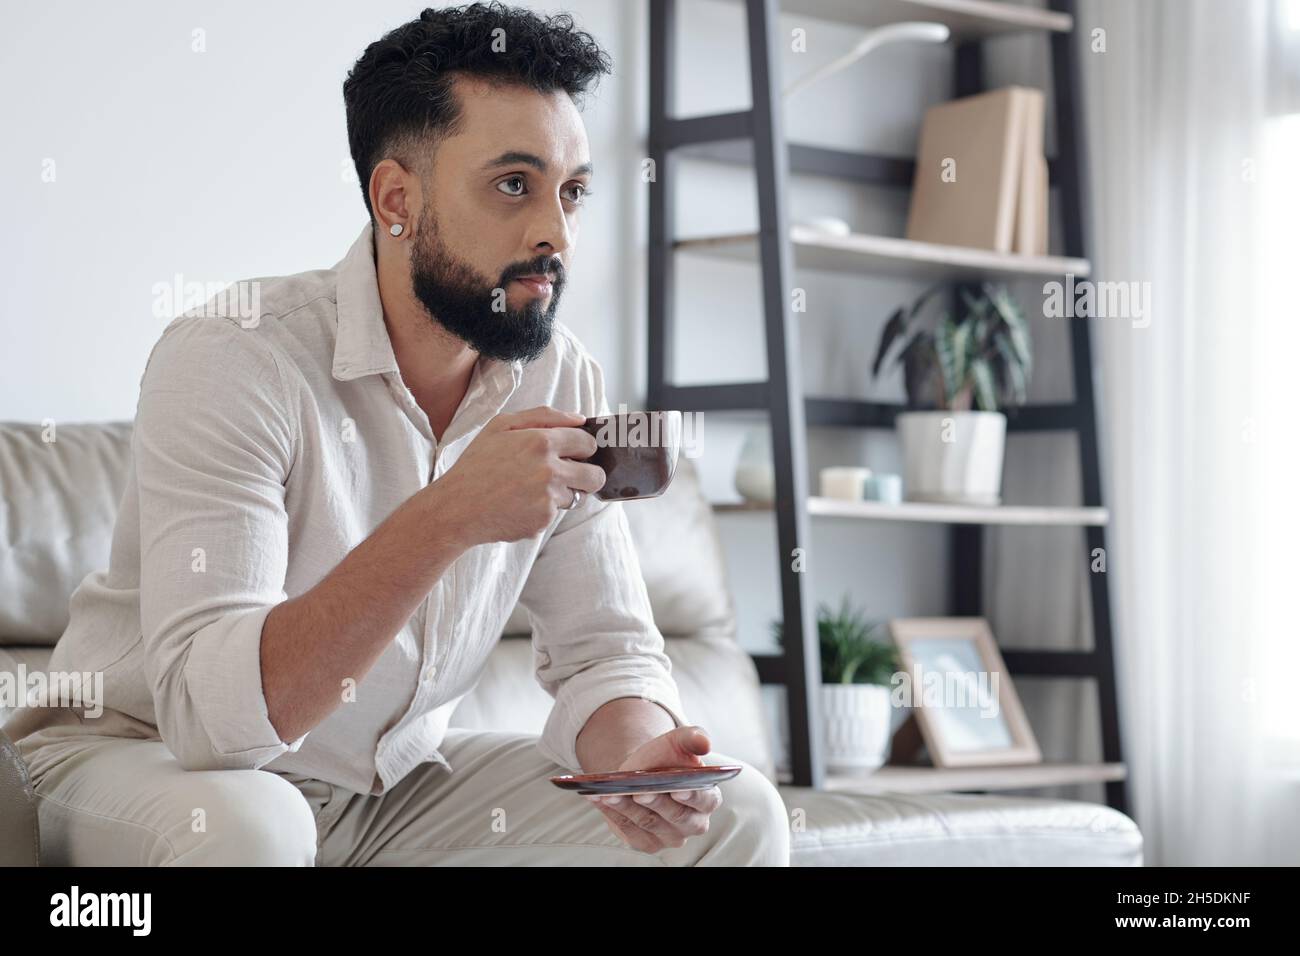 Male hipster using smartphone in concrete basement · Free Stock Photo